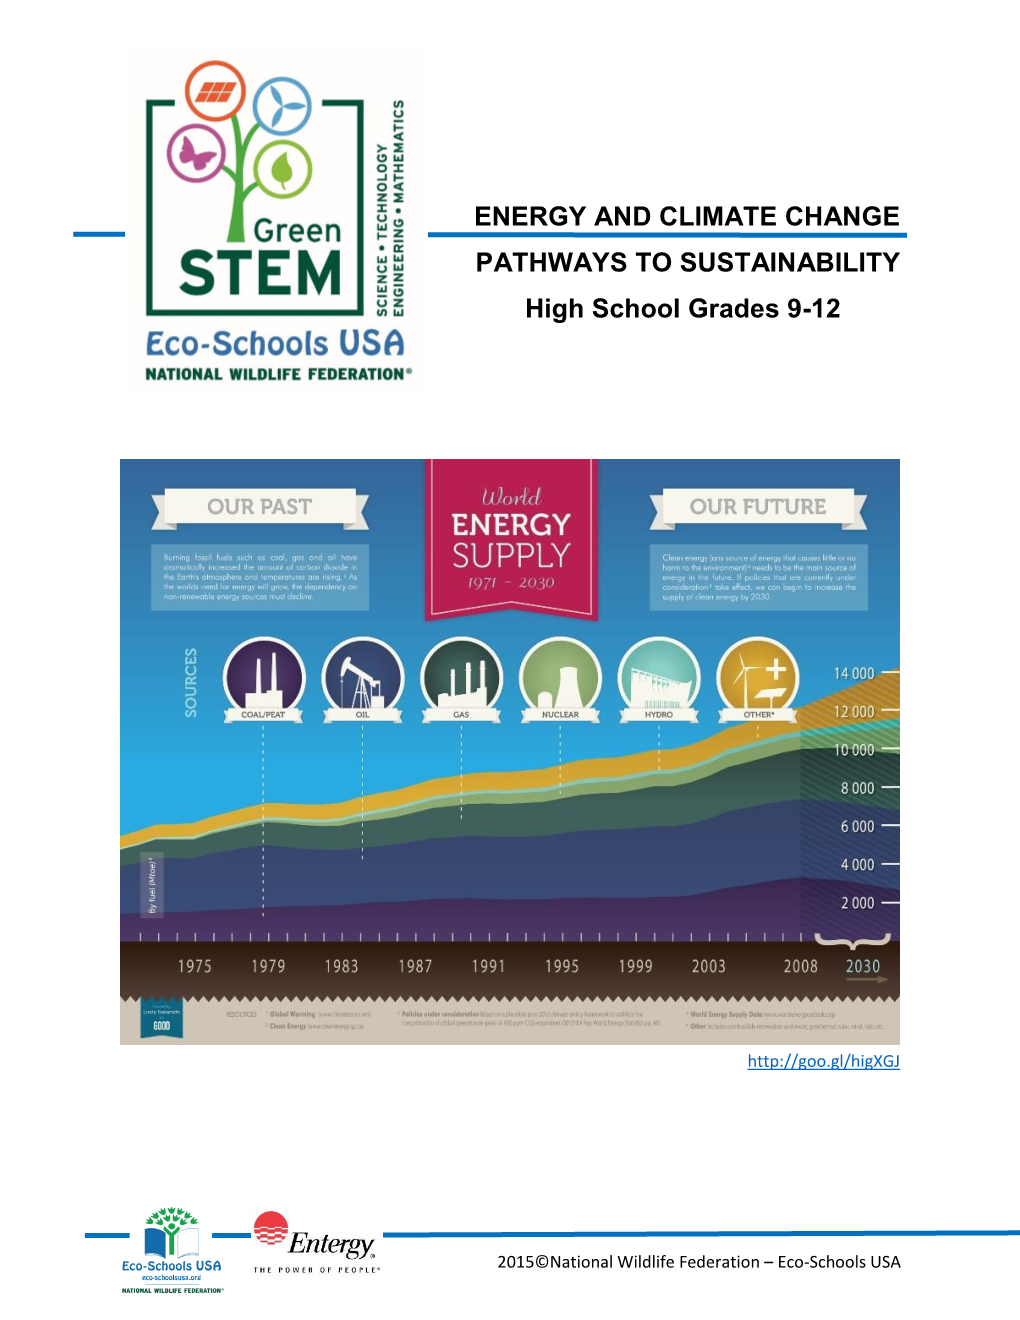 ENERGY and CLIMATE CHANGE PATHWAYS to SUSTAINABILITY High School Grades 9-12